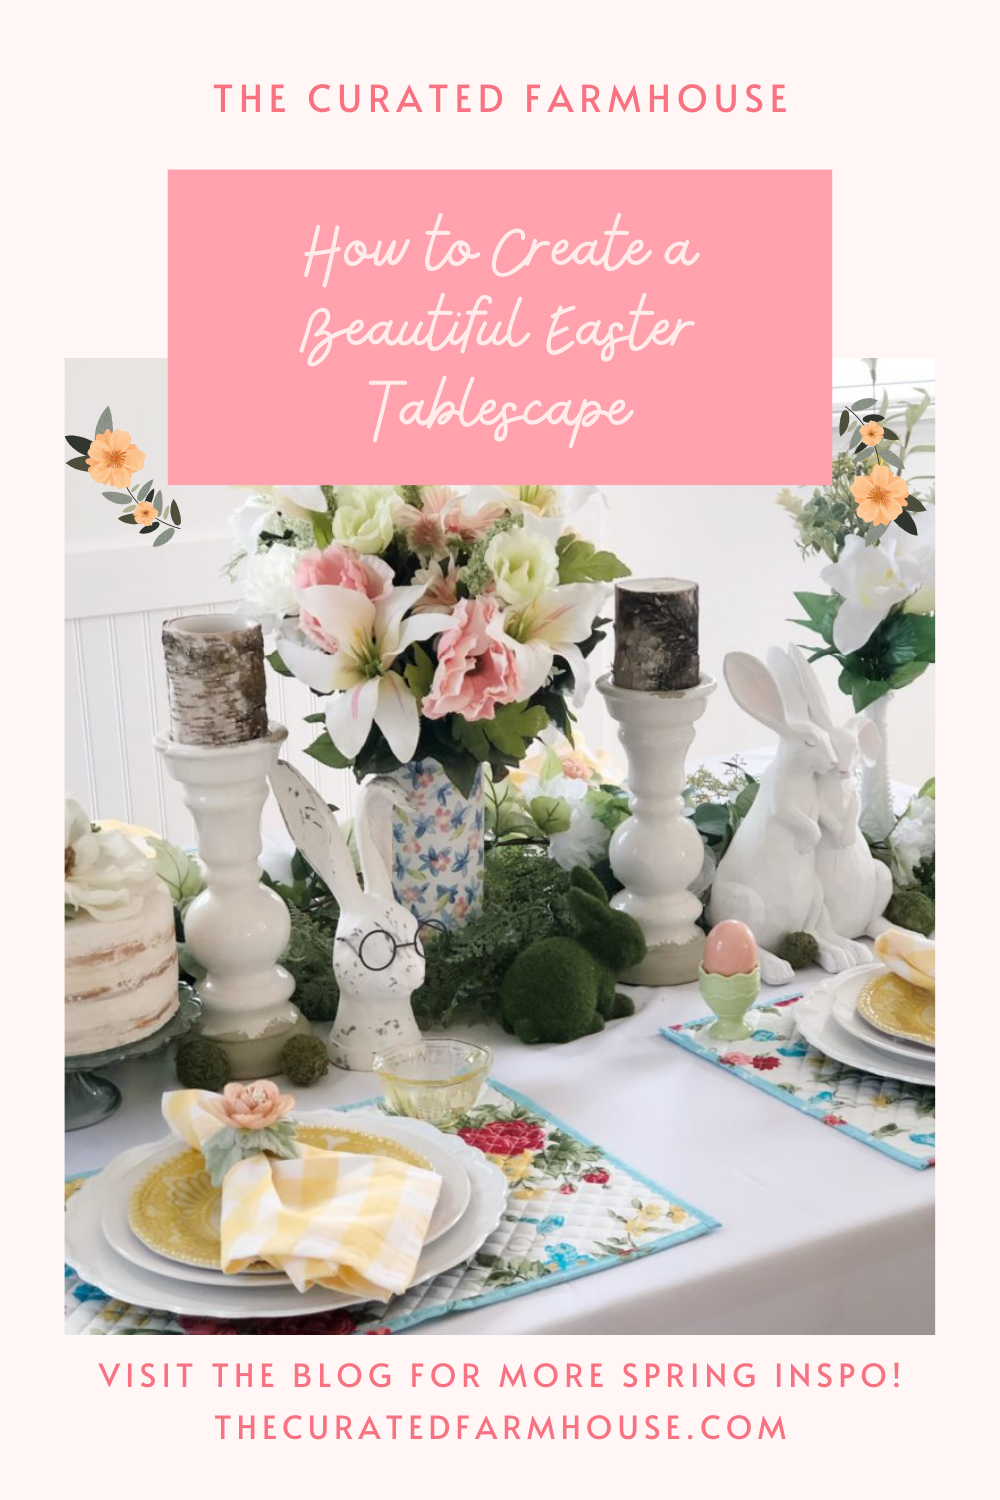 How to Create a Beautiful Easter Tablescape